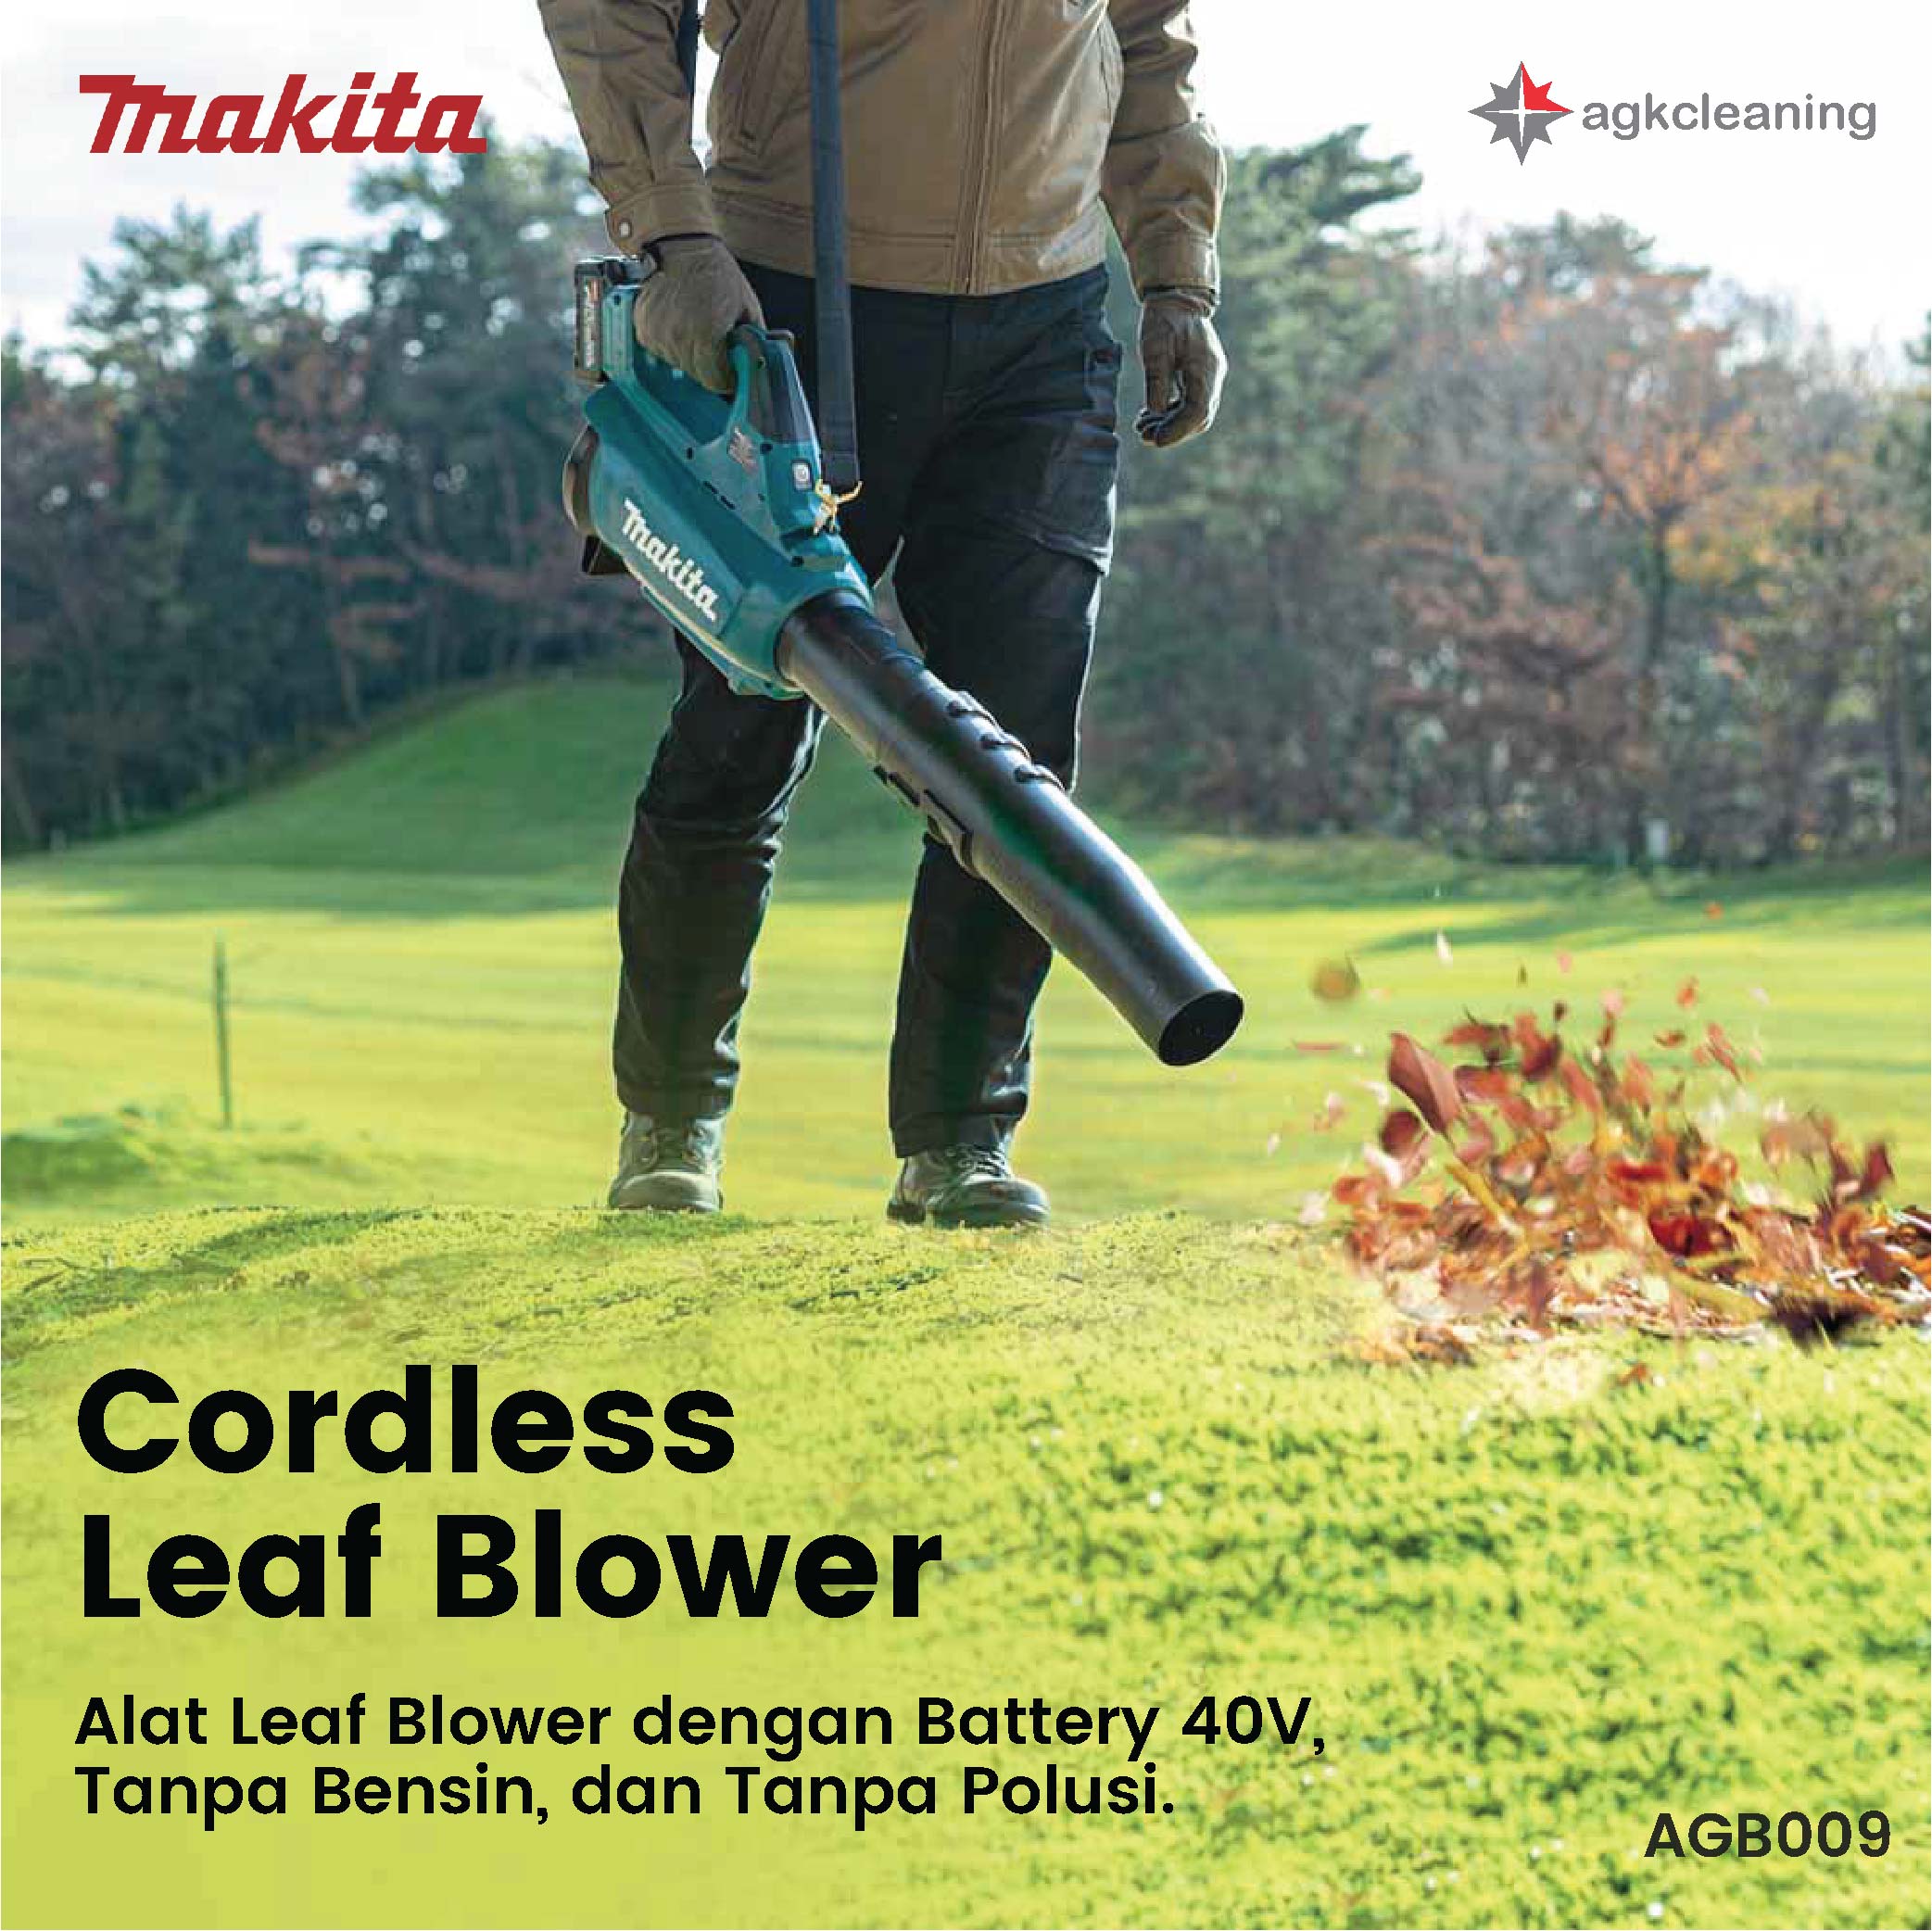 <span style='color:#000;font-size:18px;font-weight:700;'>Makita Cordless Blower</span><br><span style='color:#000;font-size:14px !important;font-weight:400!important;'>Mesin Blower Daun (AGB009)</span>